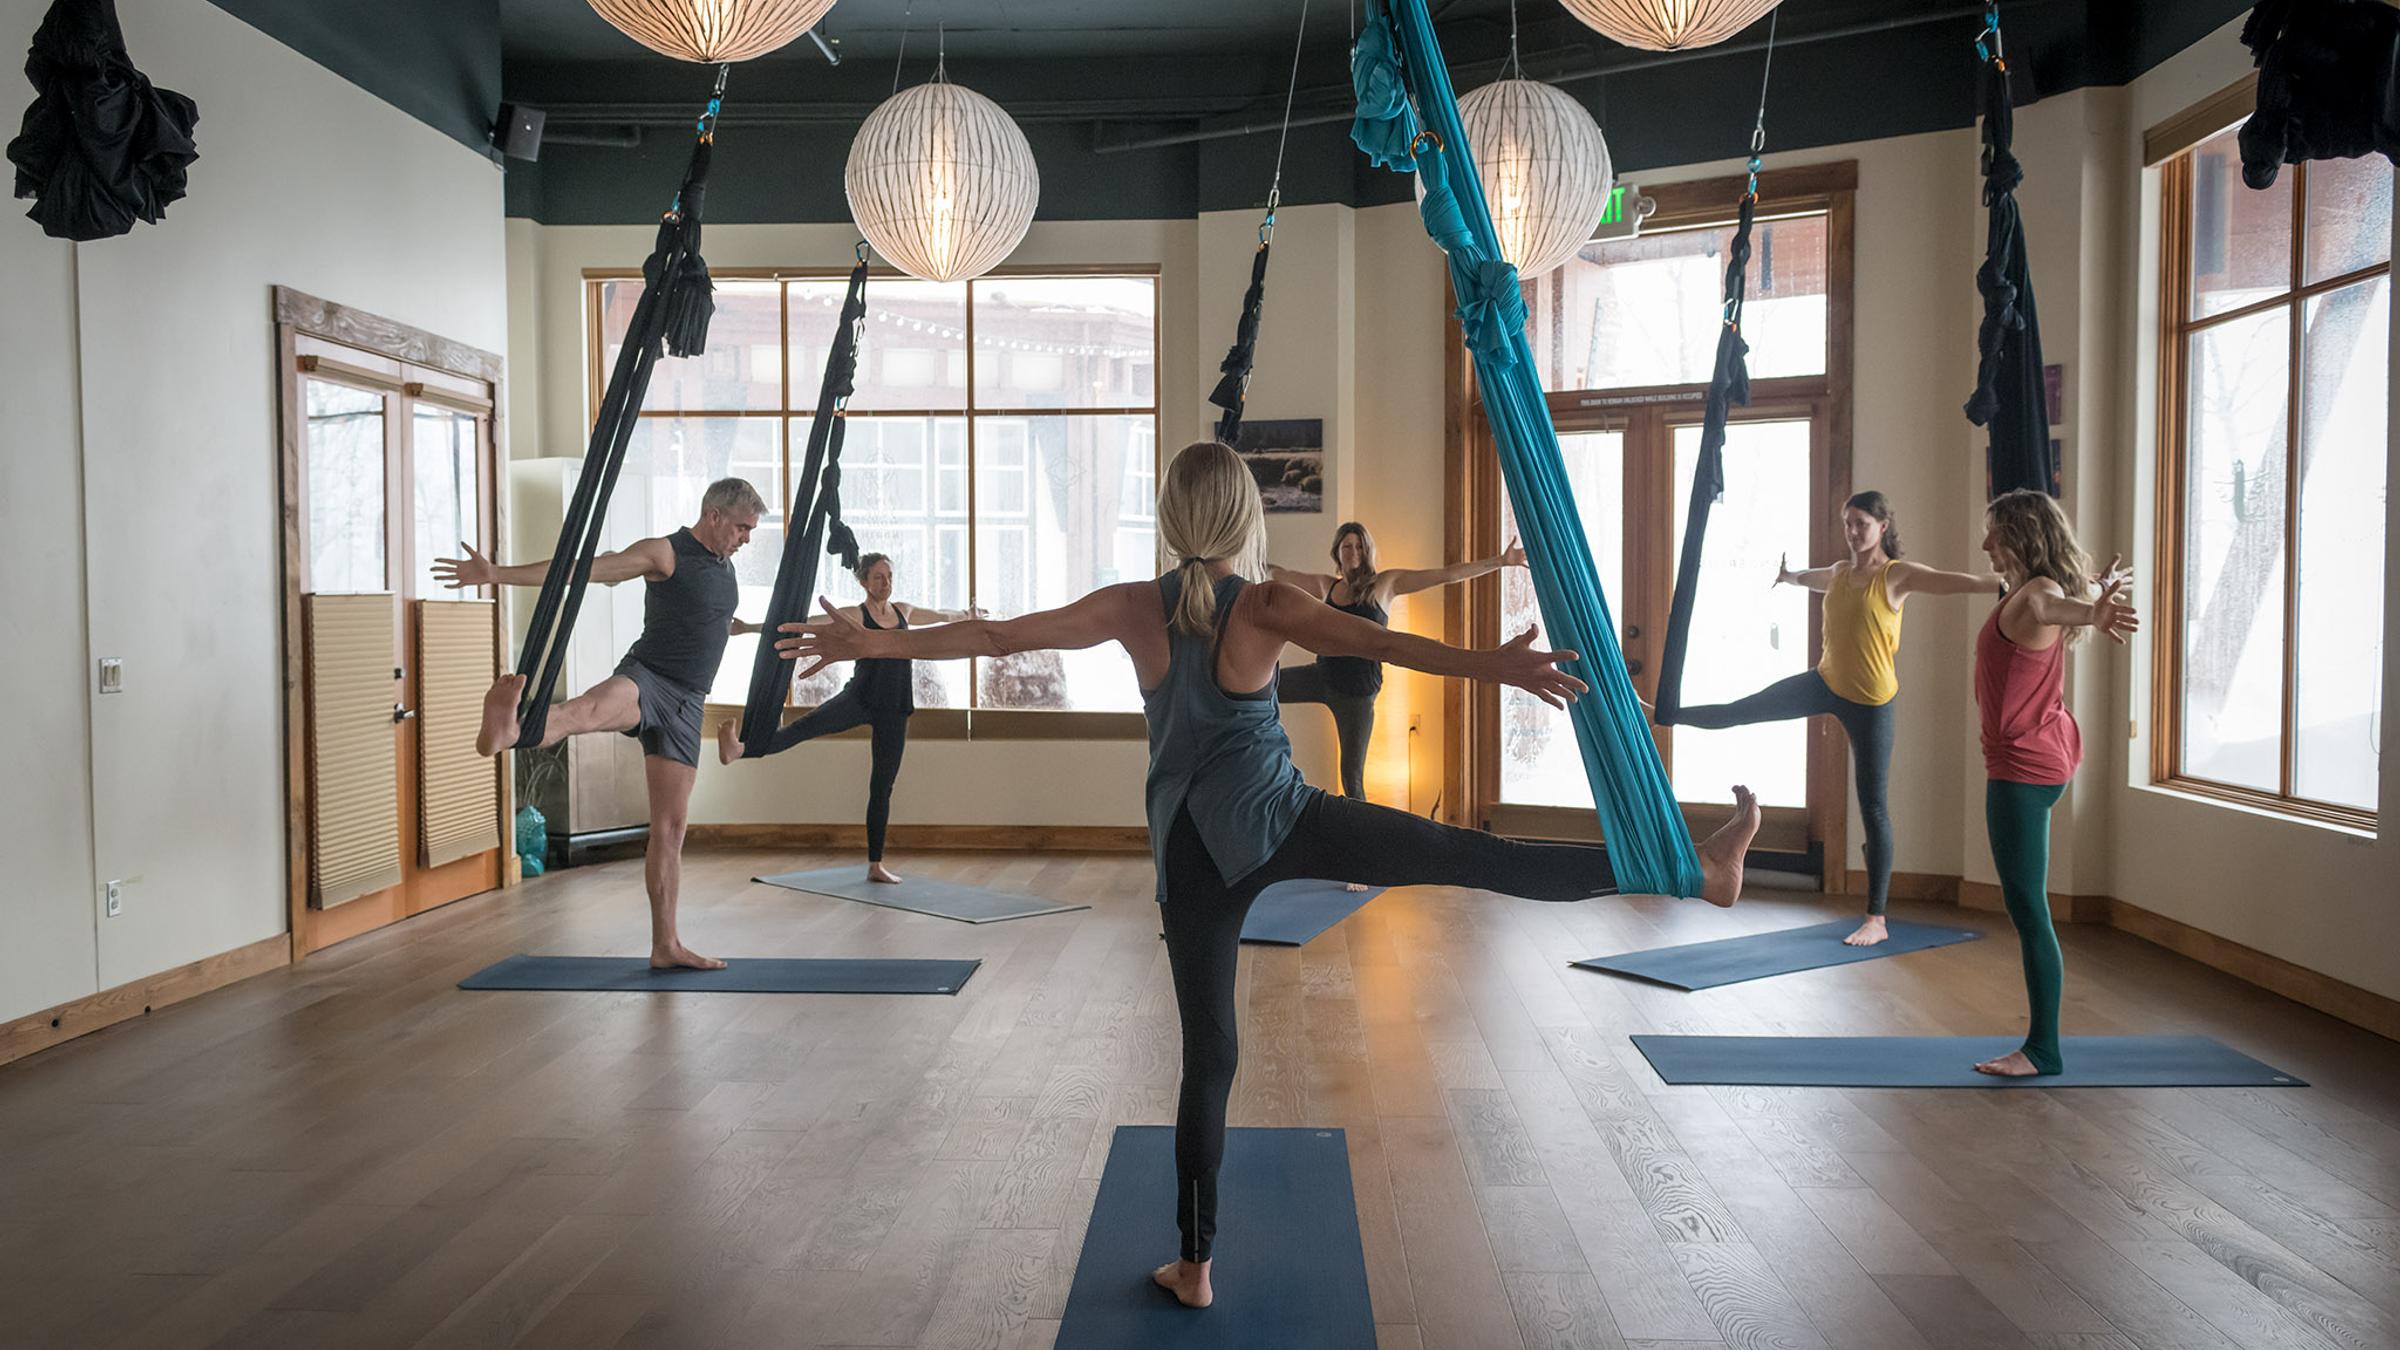 Wanderlust Studio aerial yoga class in the village at squaw valley